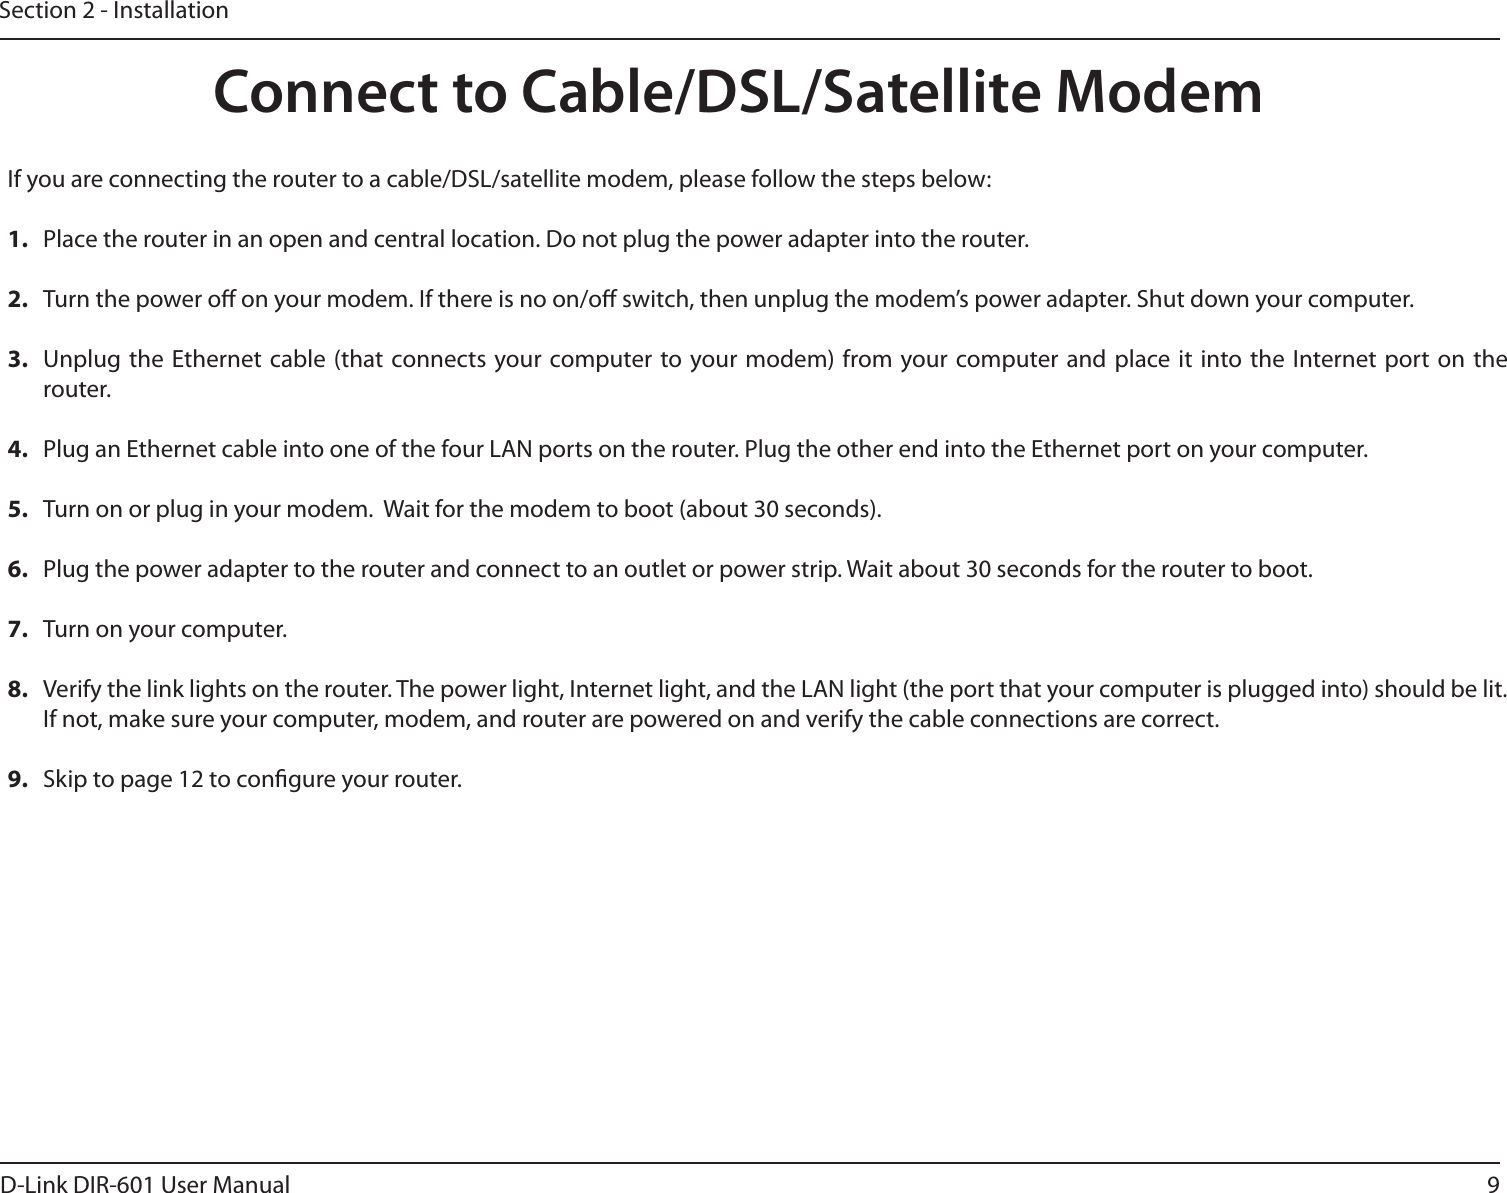 9D-Link DIR-601 User ManualSection 2 - InstallationIf you are connecting the router to a cable/DSL/satellite modem, please follow the steps below:1.  Place the router in an open and central location. Do not plug the power adapter into the router. 2.  Turn the power o on your modem. If there is no on/o switch, then unplug the modem’s power adapter. Shut down your computer.3.  Unplug the  Ethernet cable (that  connects your computer to your modem) from your computer and  place it  into the  Internet port on the router.  4.  Plug an Ethernet cable into one of the four LAN ports on the router. Plug the other end into the Ethernet port on your computer.5.  Turn on or plug in your modem.  Wait for the modem to boot (about 30 seconds). 6.  Plug the power adapter to the router and connect to an outlet or power strip. Wait about 30 seconds for the router to boot. 7.  Turn on your computer. 8.  Verify the link lights on the router. The power light, Internet light, and the LAN light (the port that your computer is plugged into) should be lit. If not, make sure your computer, modem, and router are powered on and verify the cable connections are correct. 9.  Skip to page 12 to congure your router. Connect to Cable/DSL/Satellite Modem